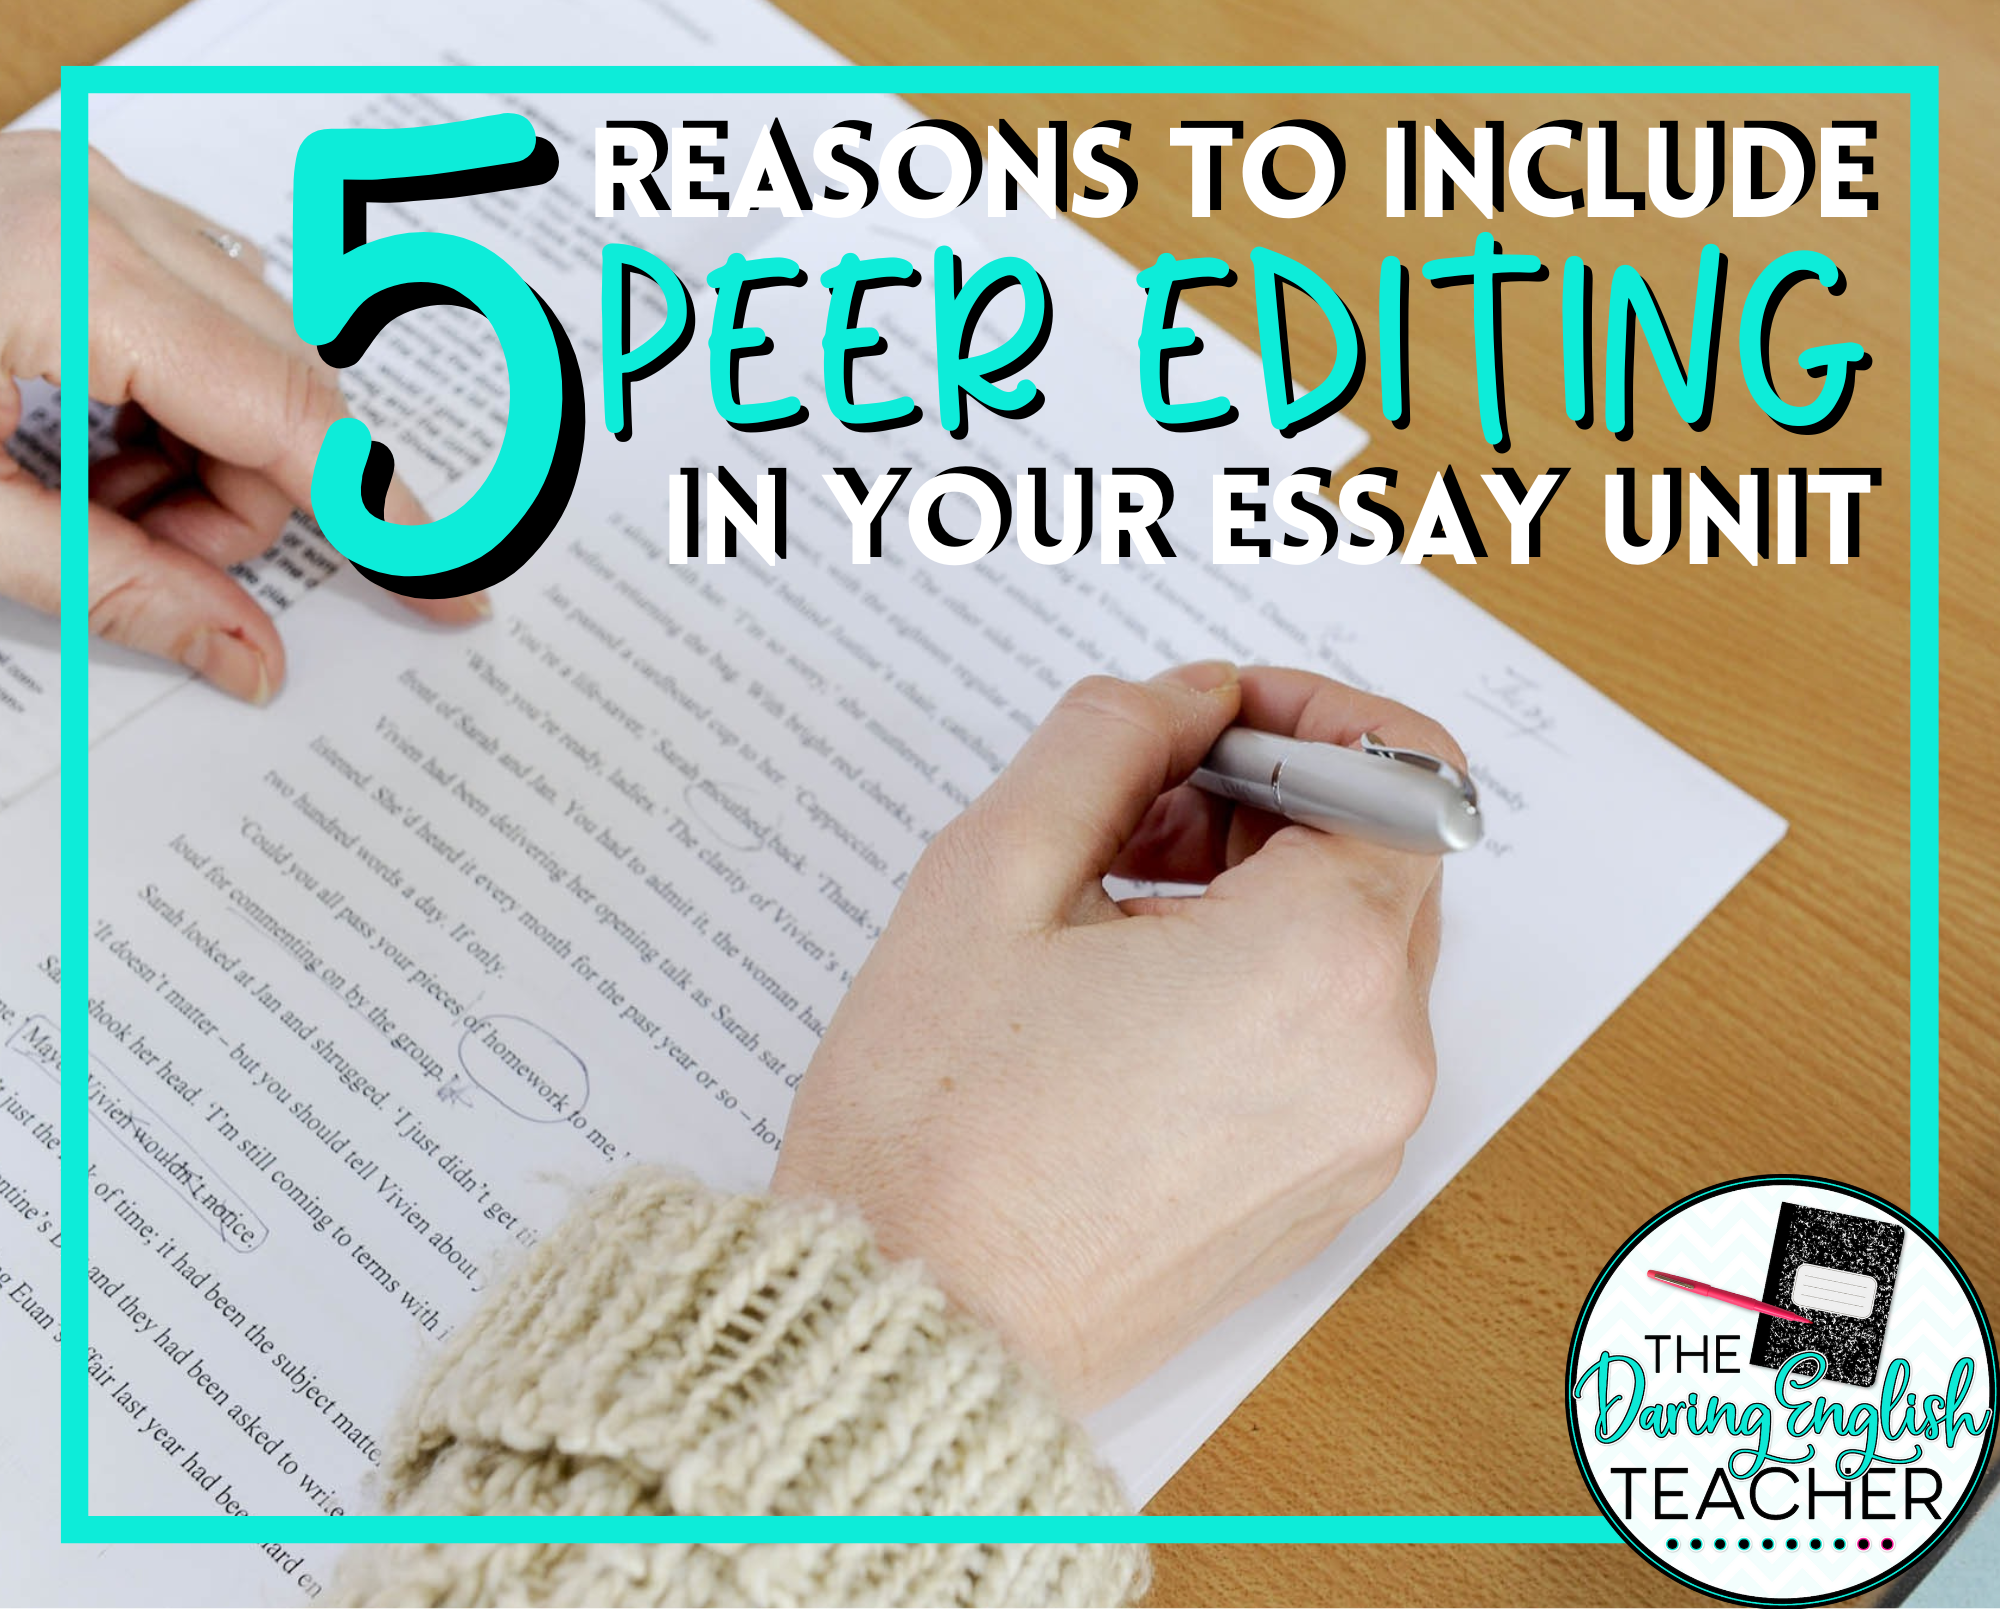 5 Reasons to Include Peer Editing in Your Essay Unit